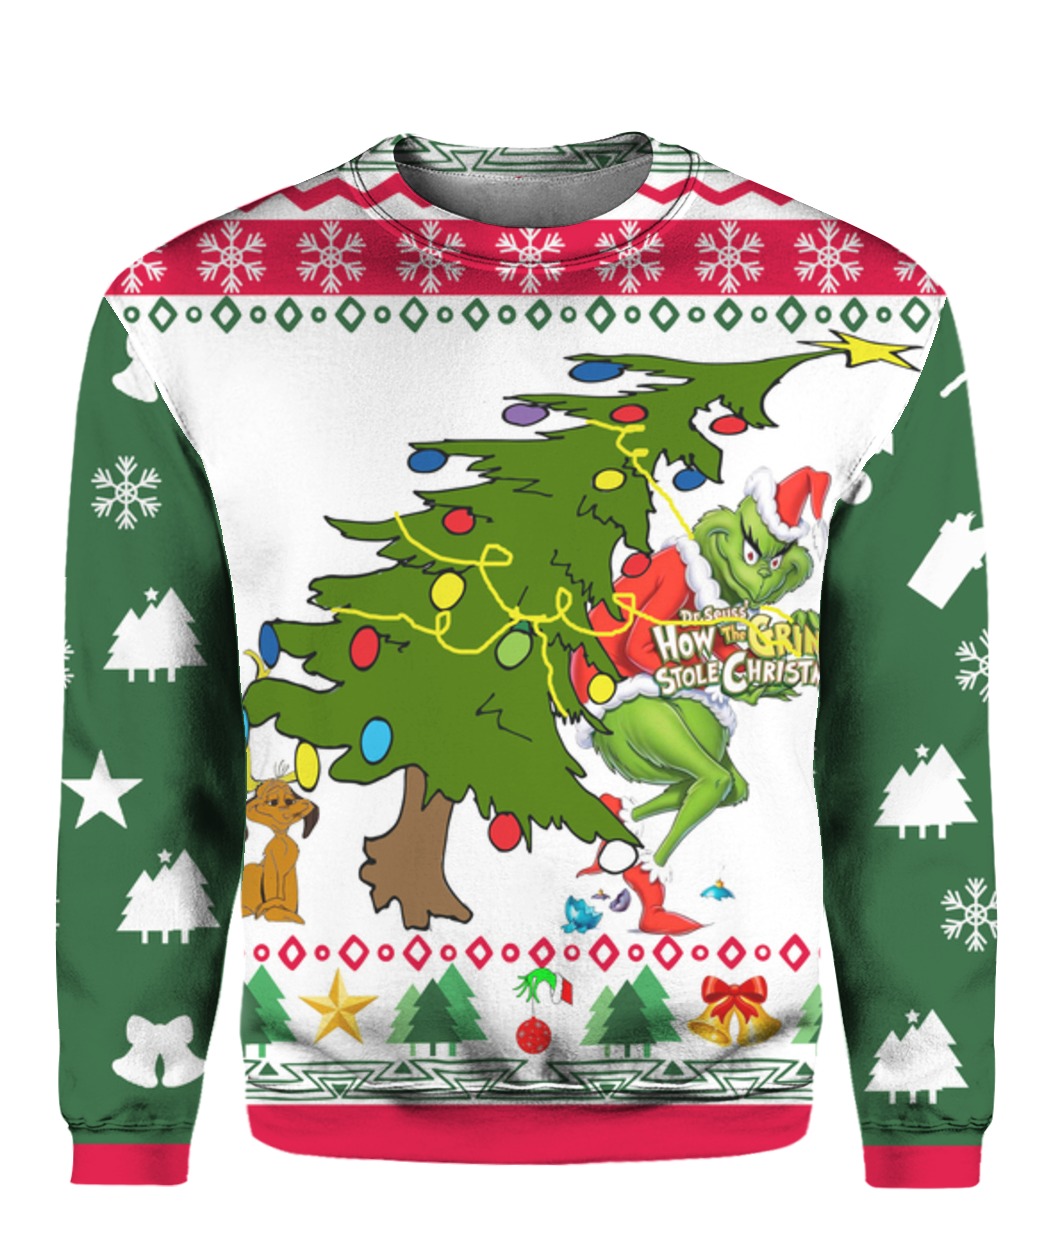 The grinch stole christmas tree full printing ugly christmas sweater 1